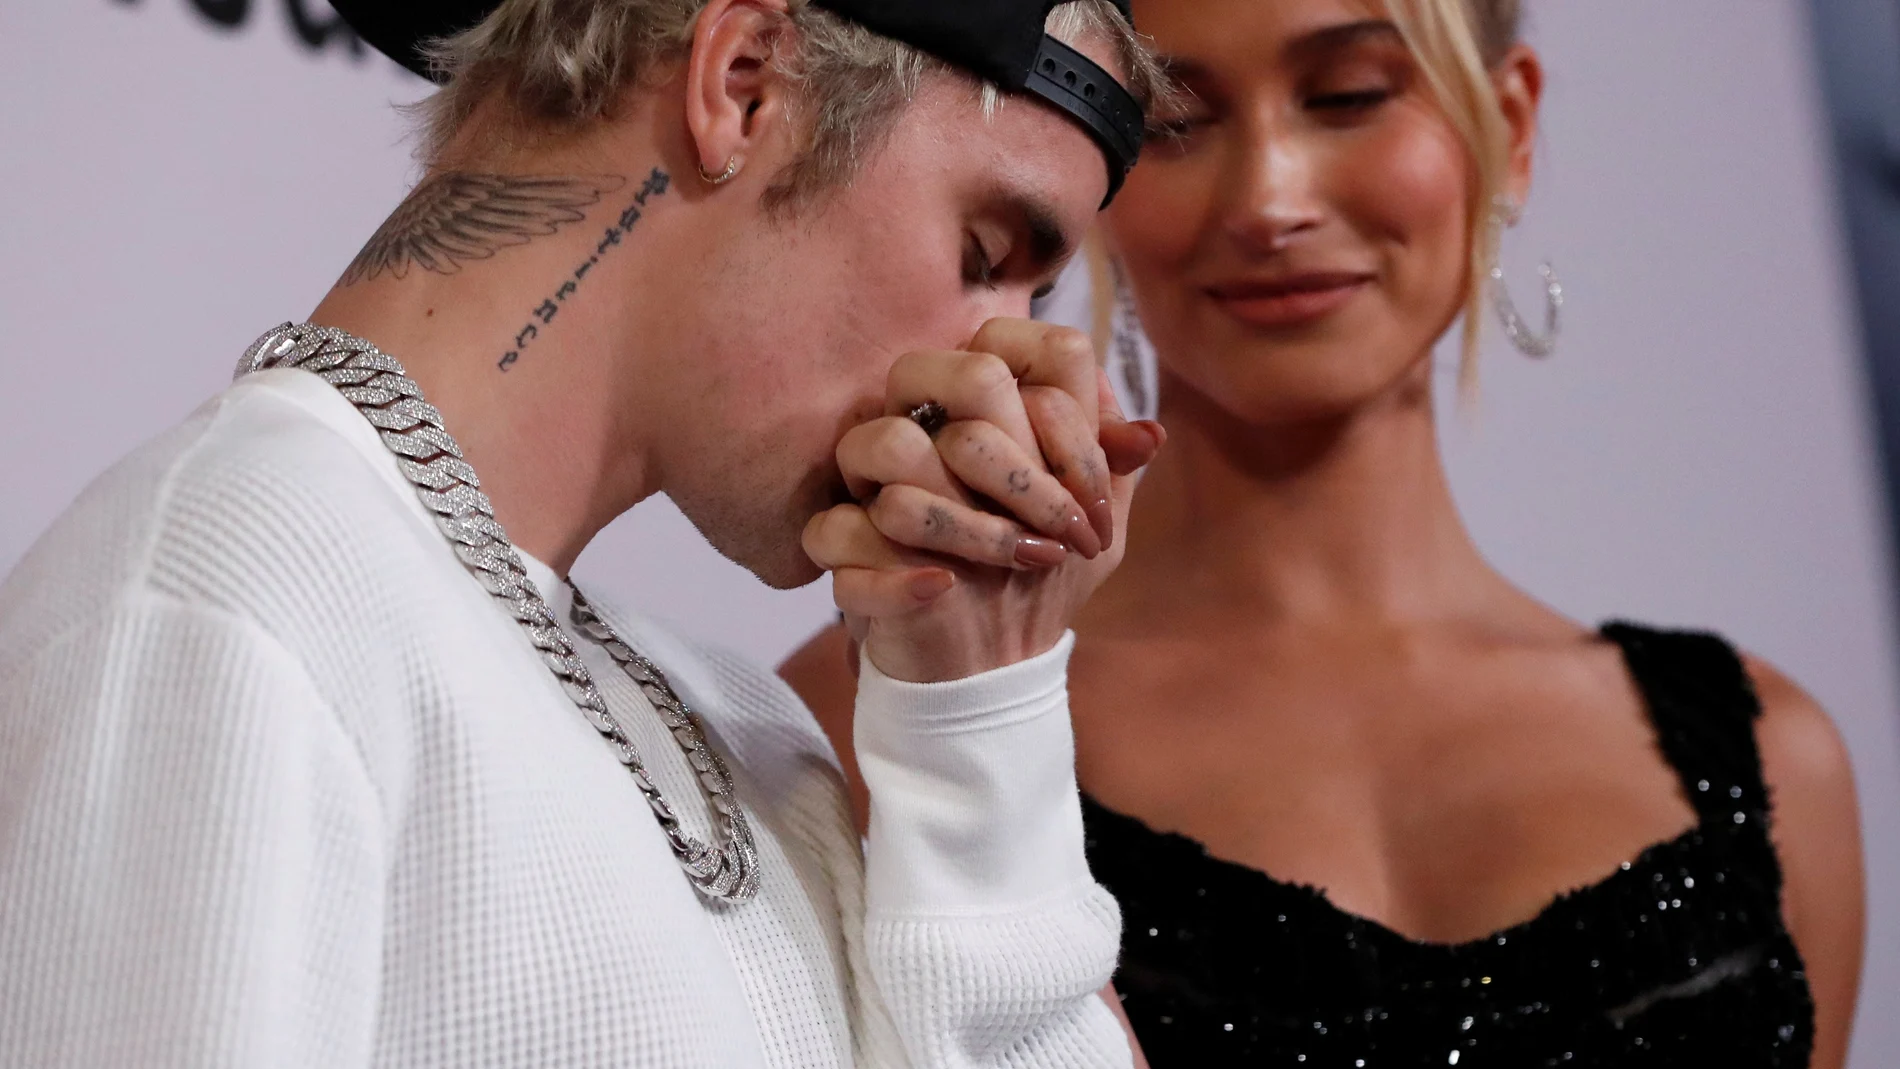 Singer Bieber kisses the hand of his wife Hailey Baldwin at the premiere for the documentary television series "Justin Bieber: Seasons" in Los Angeles